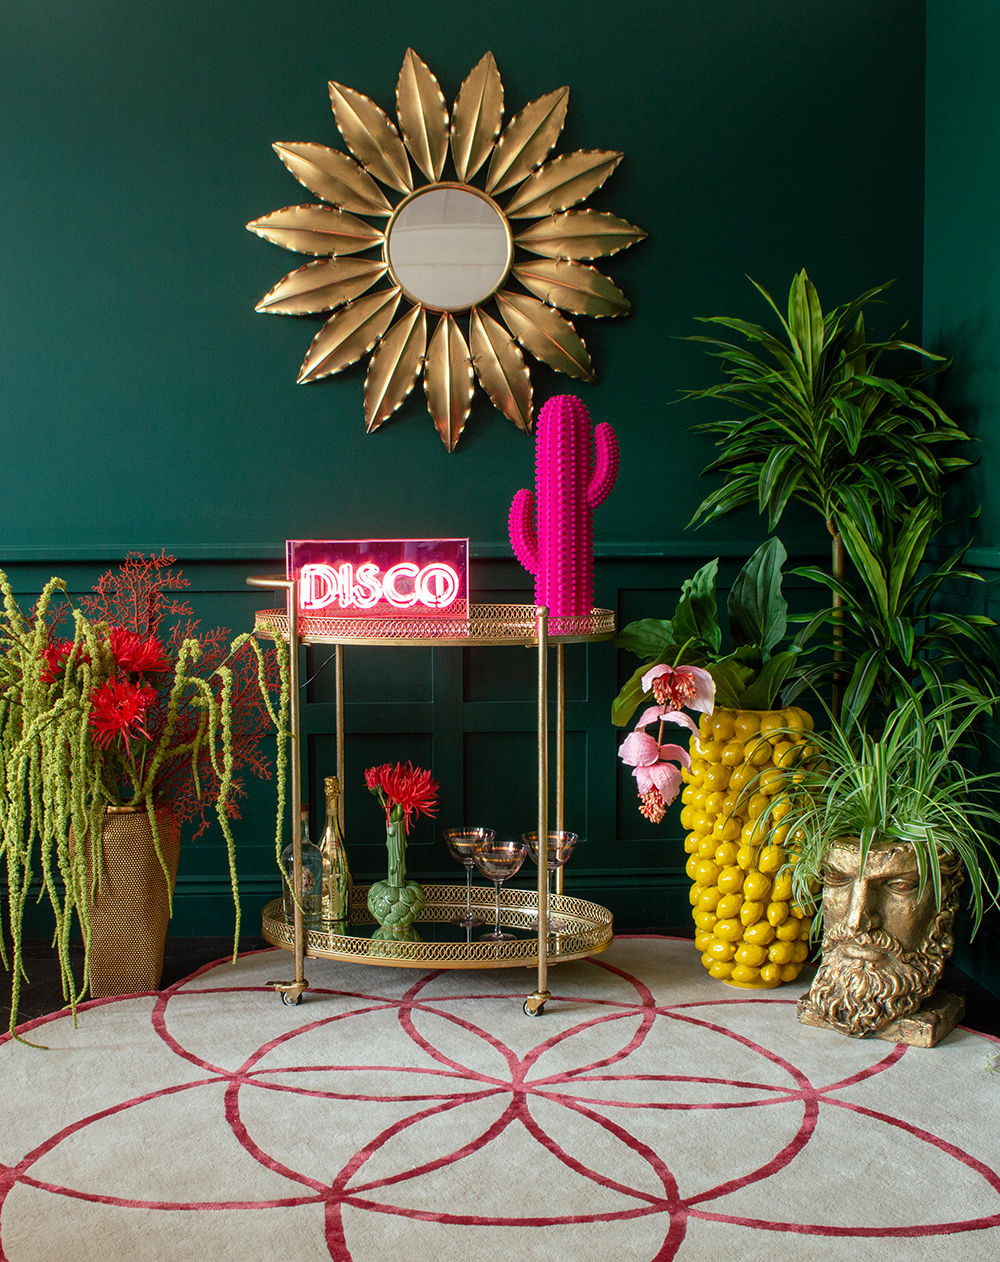 How to style a drinks trolley - don't forget to add a neon light! Throw in plenty of cool glassware, house plants and a statement wall mirror and voila!